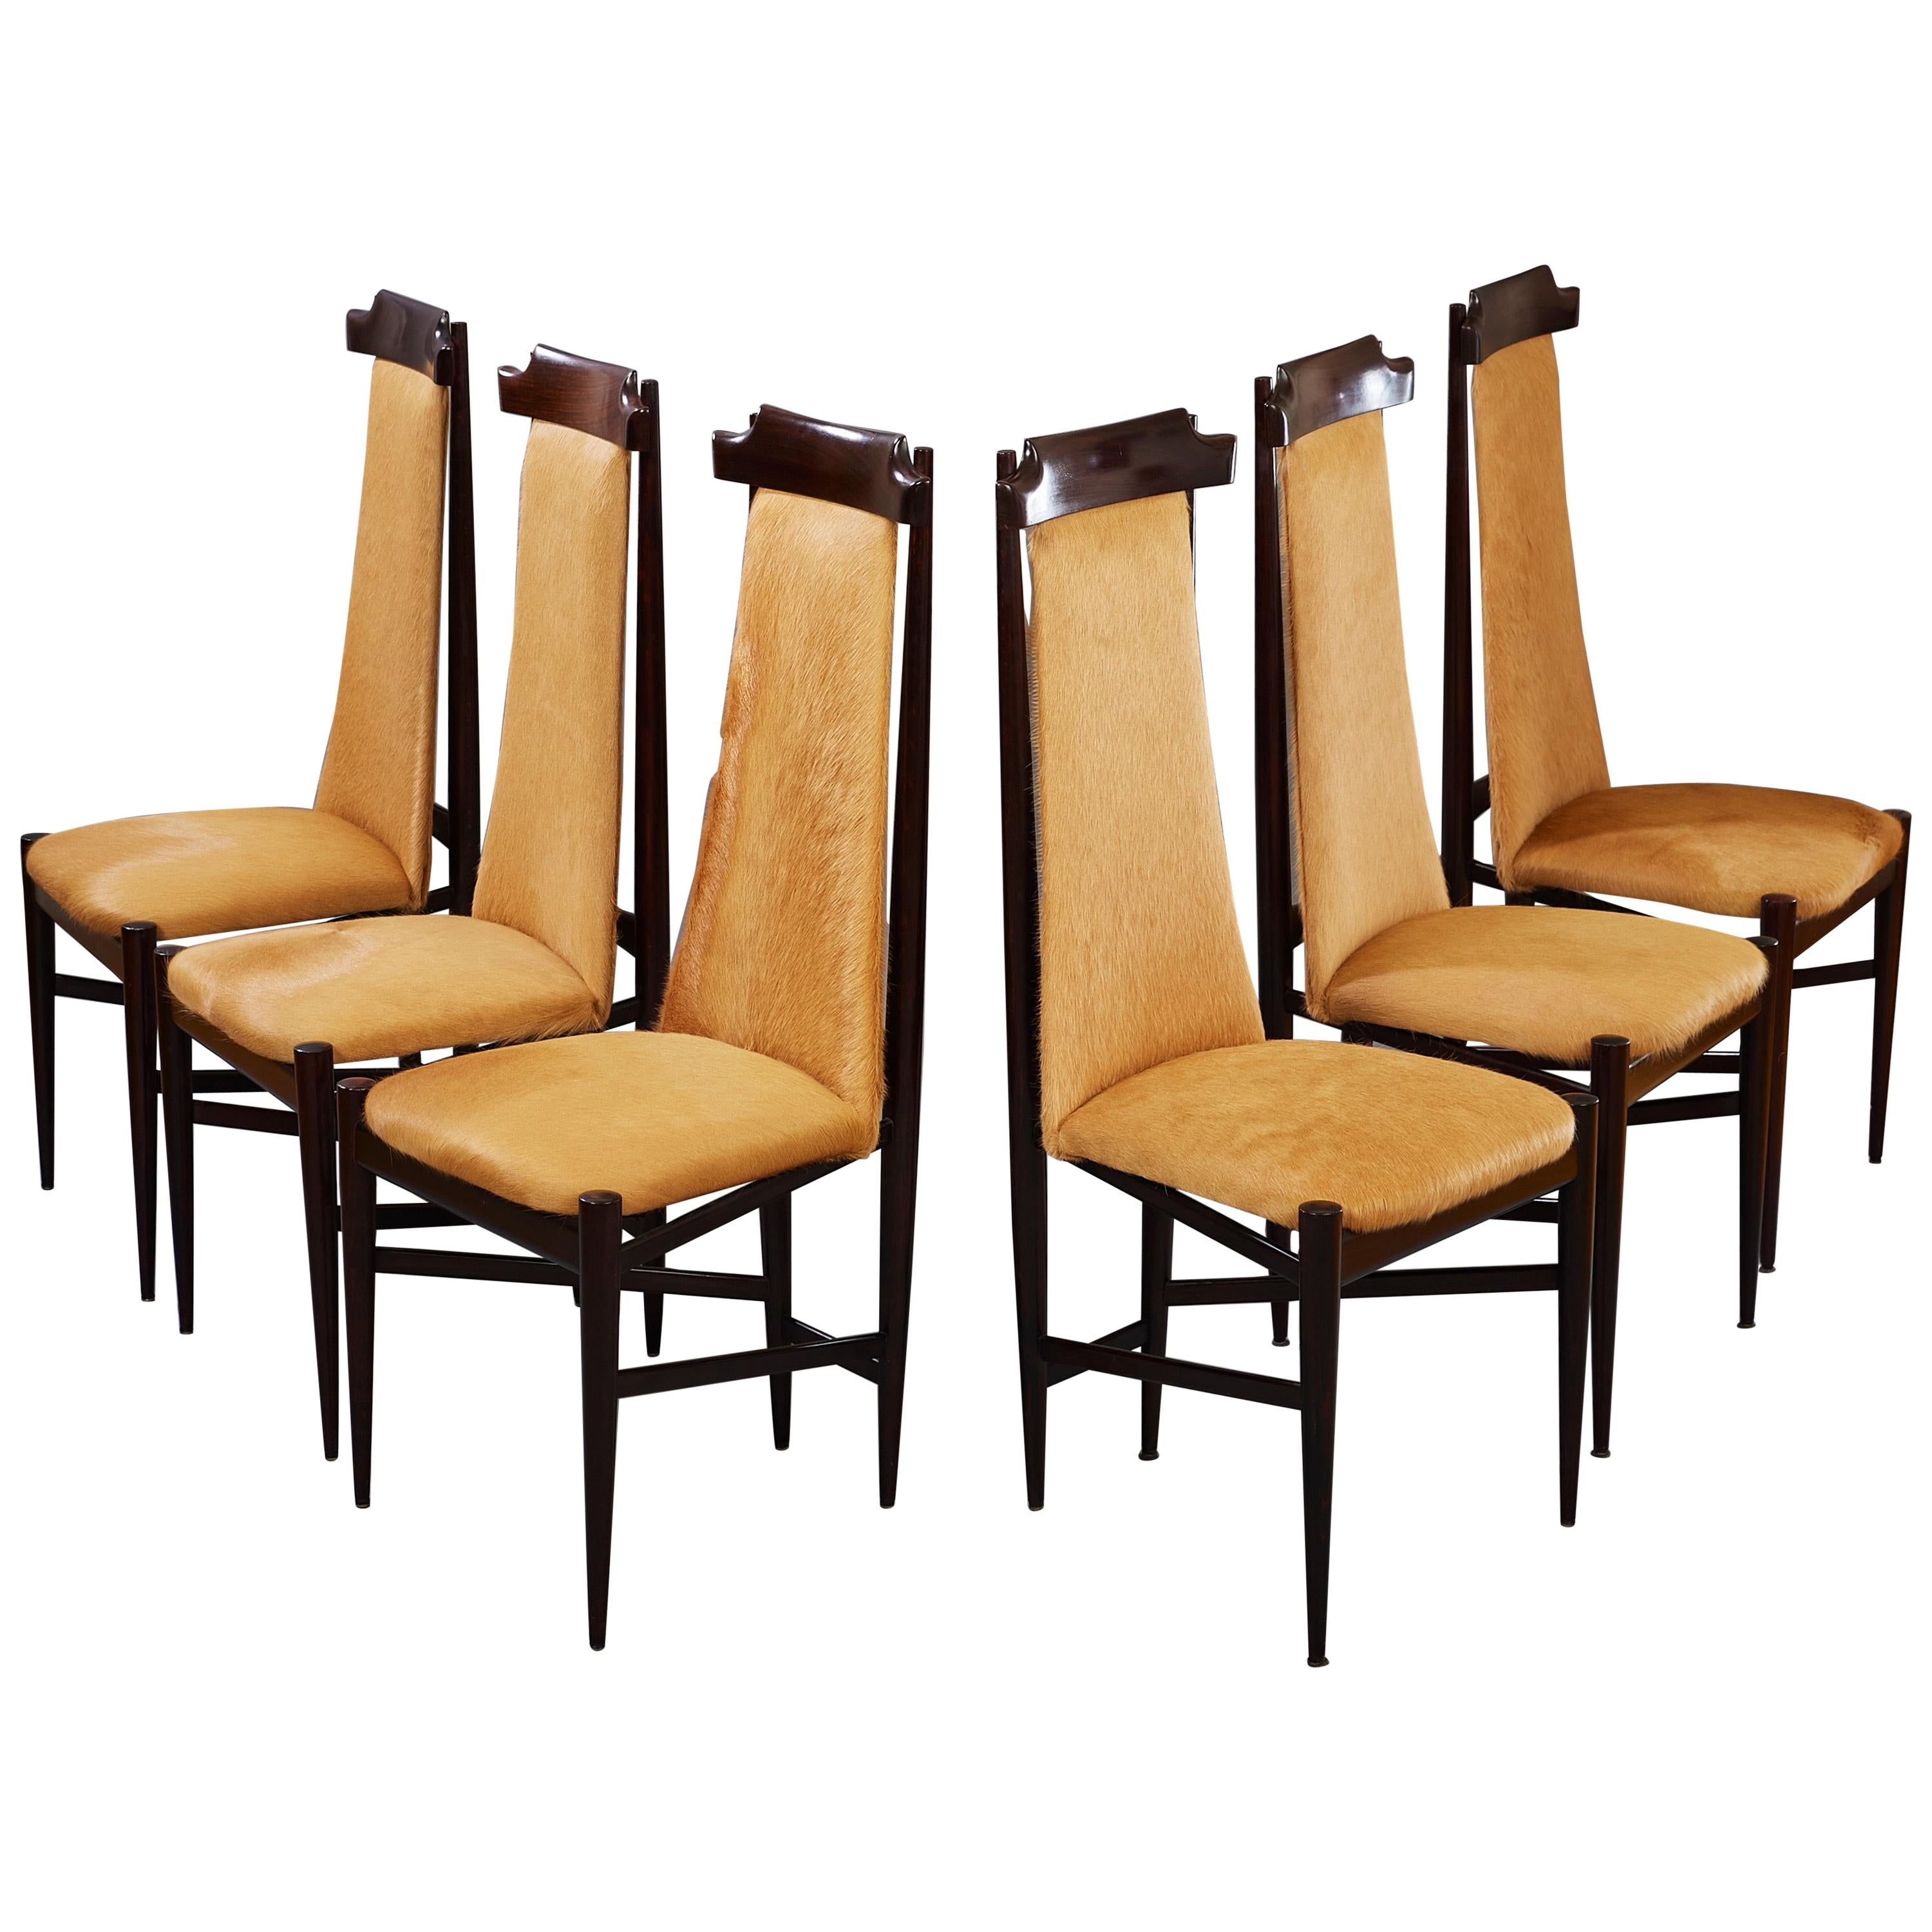 Sergio Rodrigues Six Dining Chairs in Wood and Tan Cowhide, Brazil, 1960s For Sale